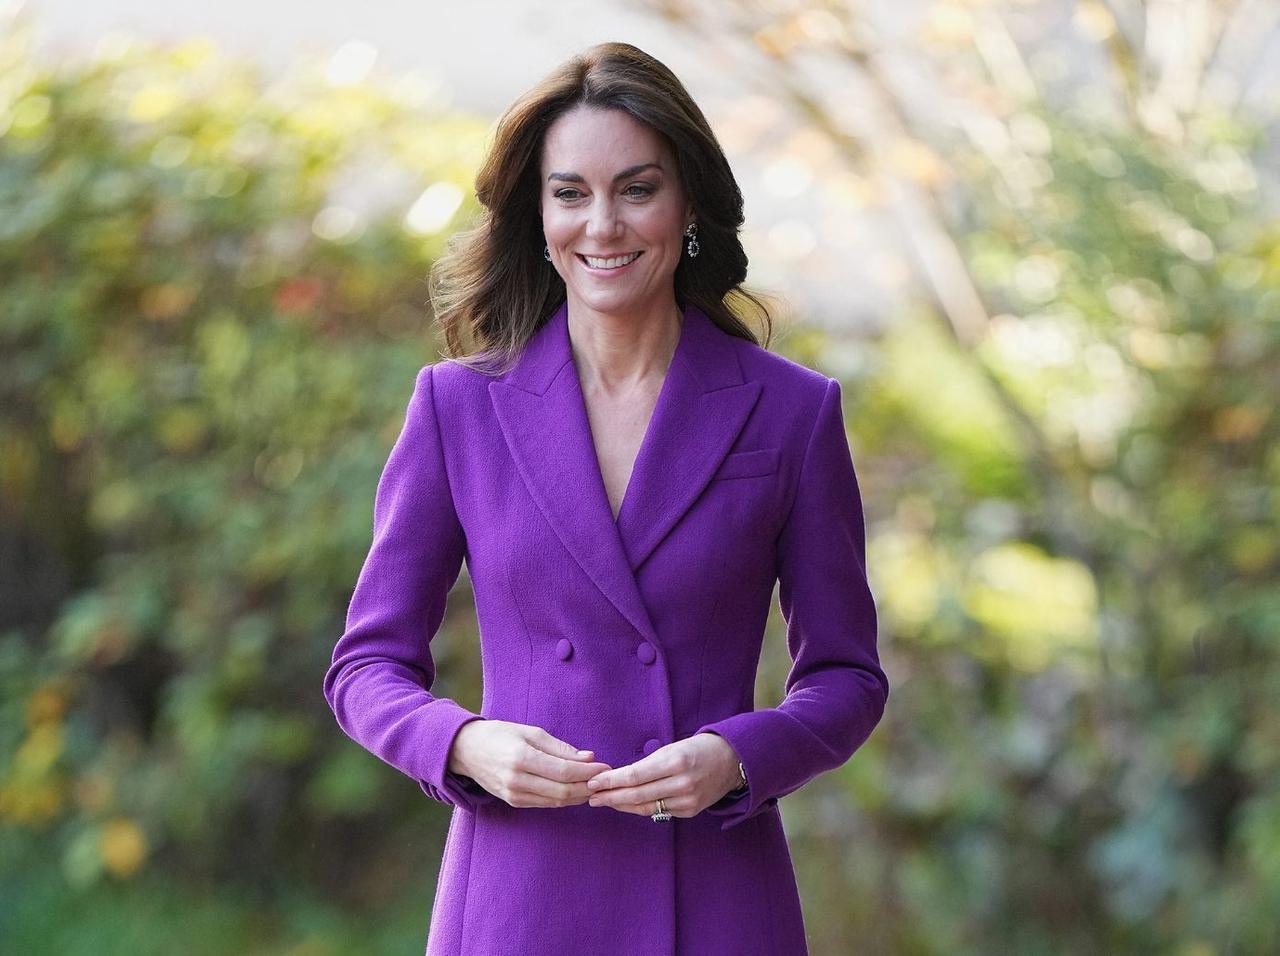 Sunny Hostin Says Kate Middleton's Body Double Was Seen In New Video